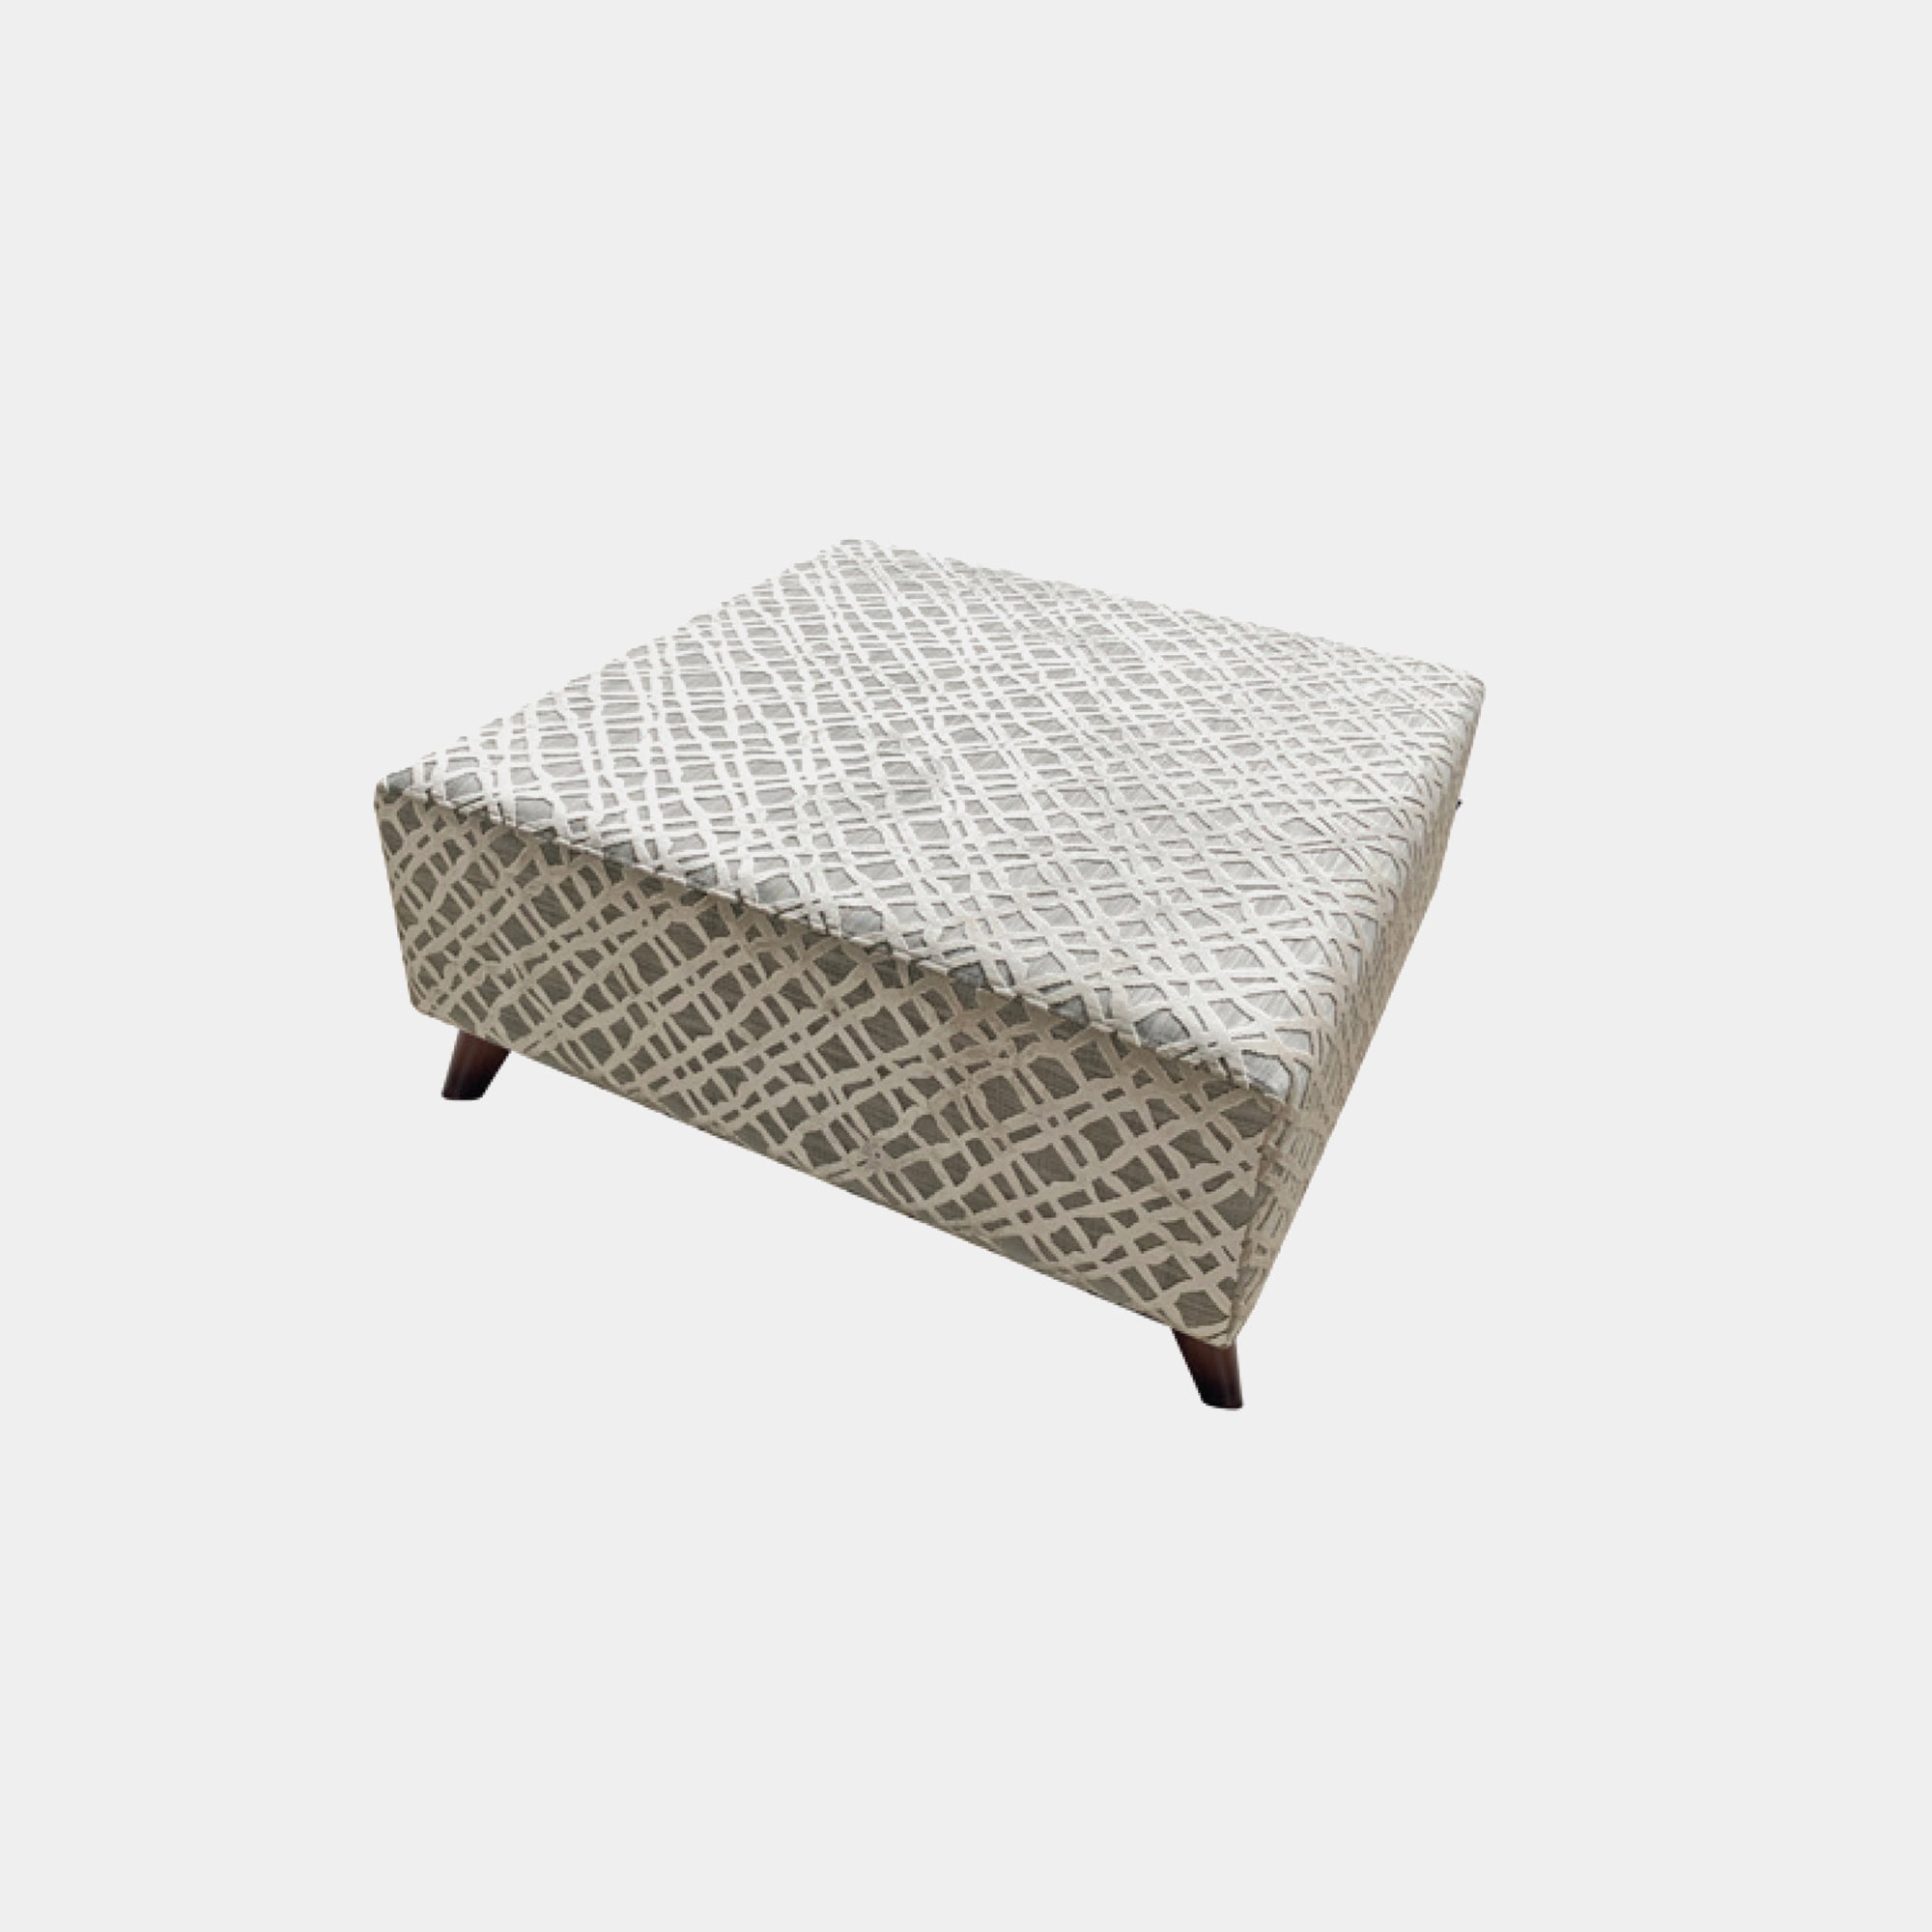 Adele - Footstool In Fabric Band 1 Pluto